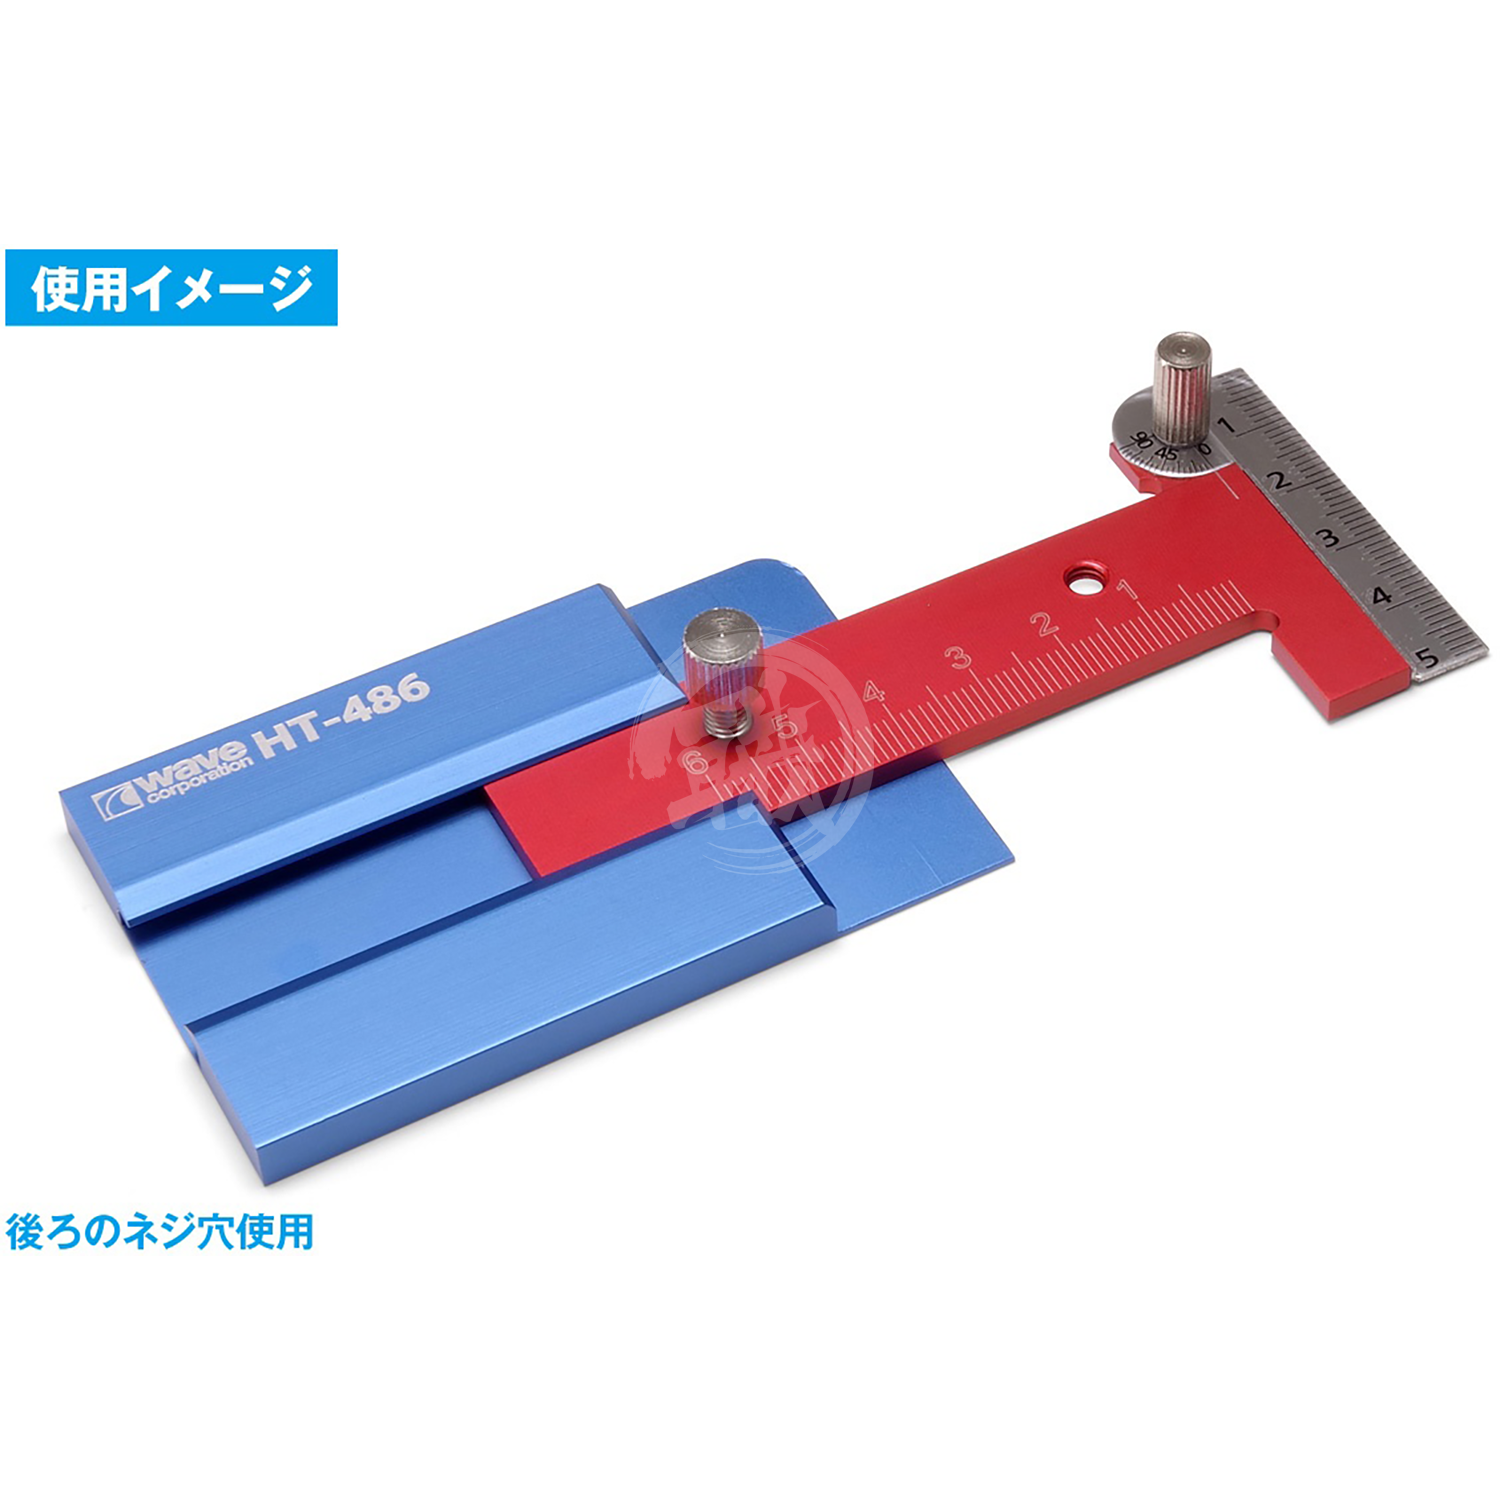 Wave Materials HG Stainless T Square Ruler